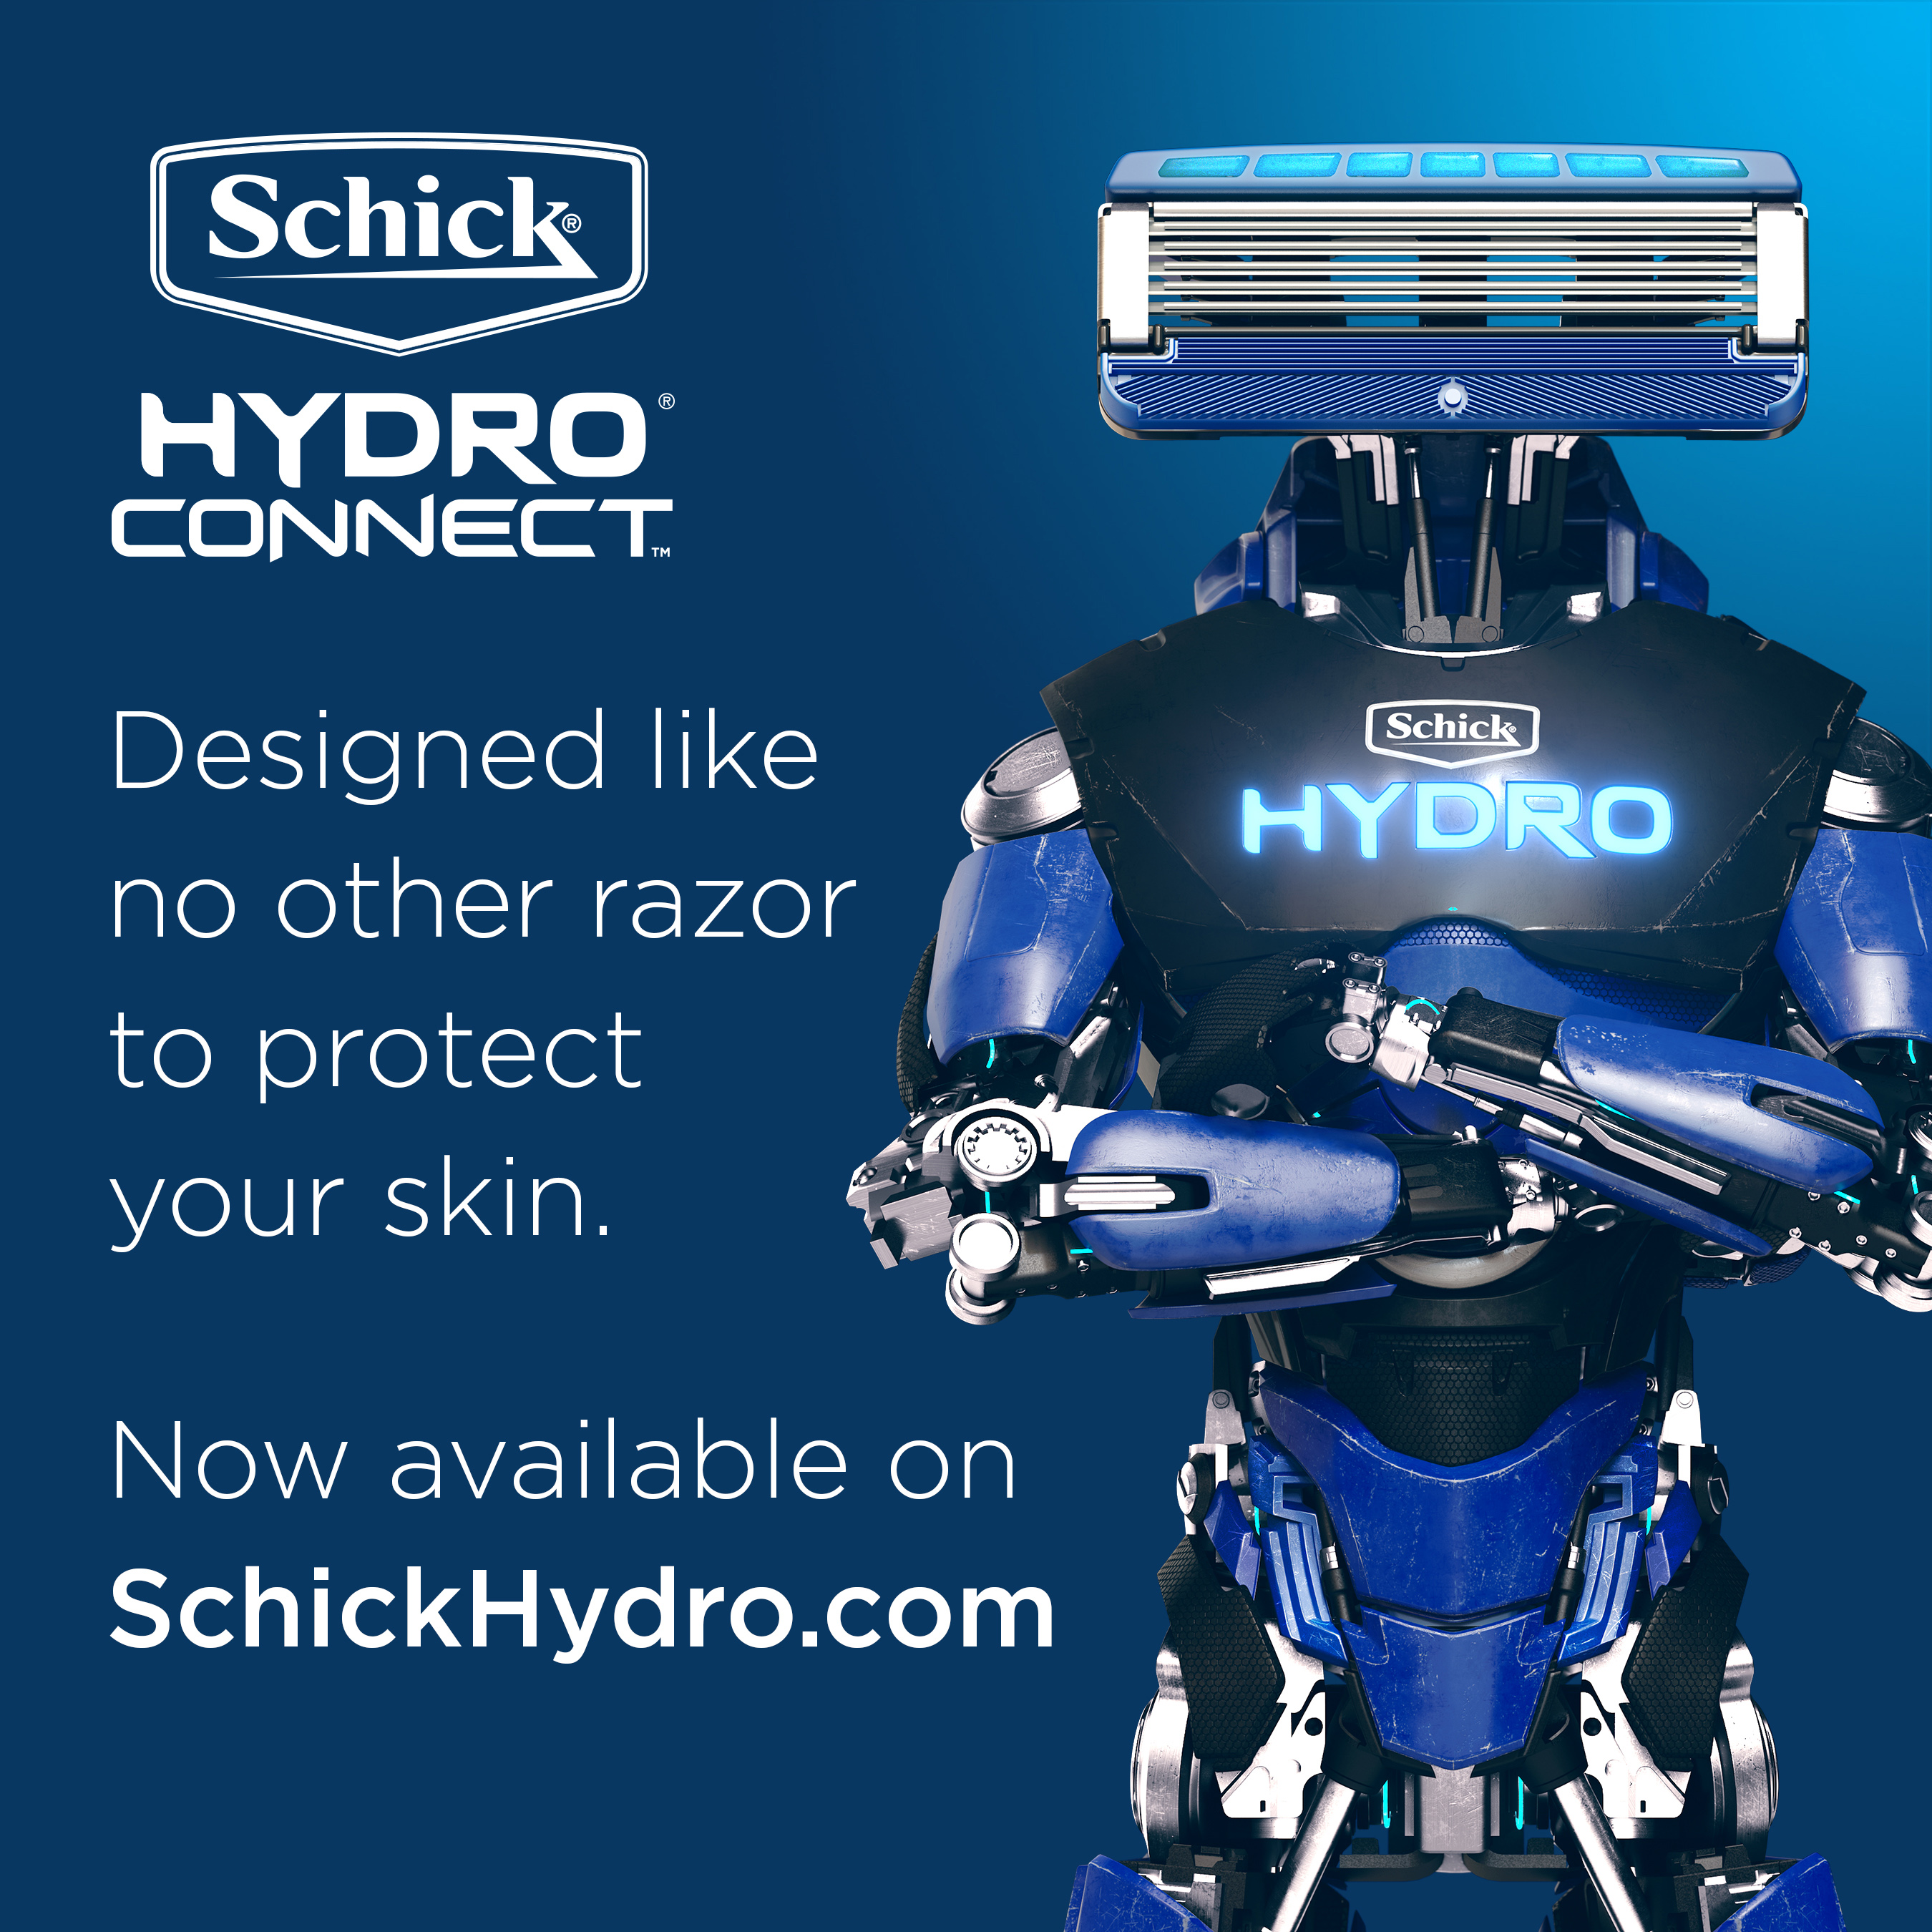 Schick Hydro Connect™ is designed like no other to fit the Gillette Fusion† and Mach3† razor handles1, initially available only on SchickHydro.com (in the U.S.), Schick Hydro’s new direct-to-consumer website. †Schick Hydro Connect™ is not manufactured or distributed by The Gillette Company LLC, owner of the registered marks Gillette®, Fusion® and Mach3®. 1Schick Hydro Connect™ 3 fits Mach3® handles. Schick Hydro Connect™ 5 fits Fusion® handles. Schick Hydro® refills are not compatible with Schick Hydro Connect™ handles.